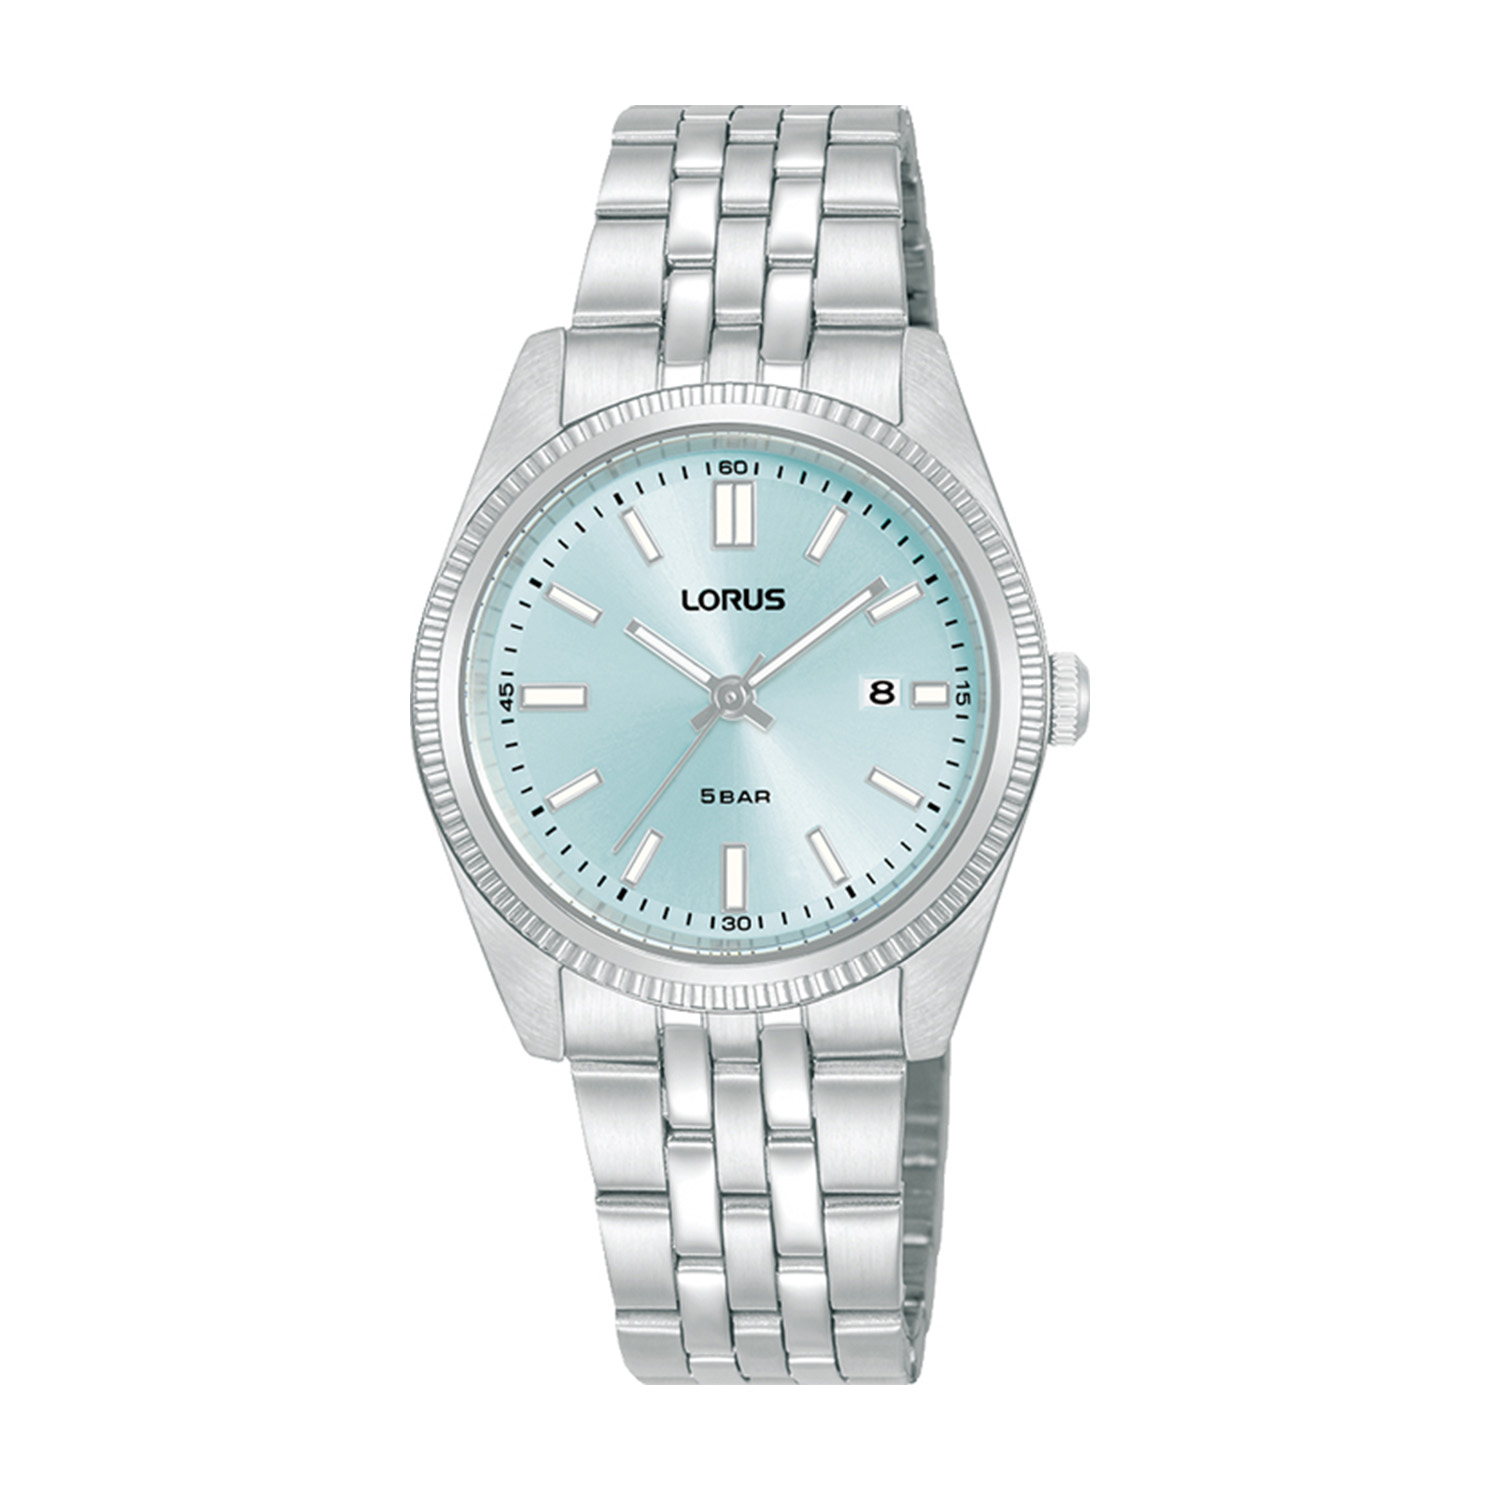 Womens watch LORUS made of silver stainless steel with light blue dial and bracelet.